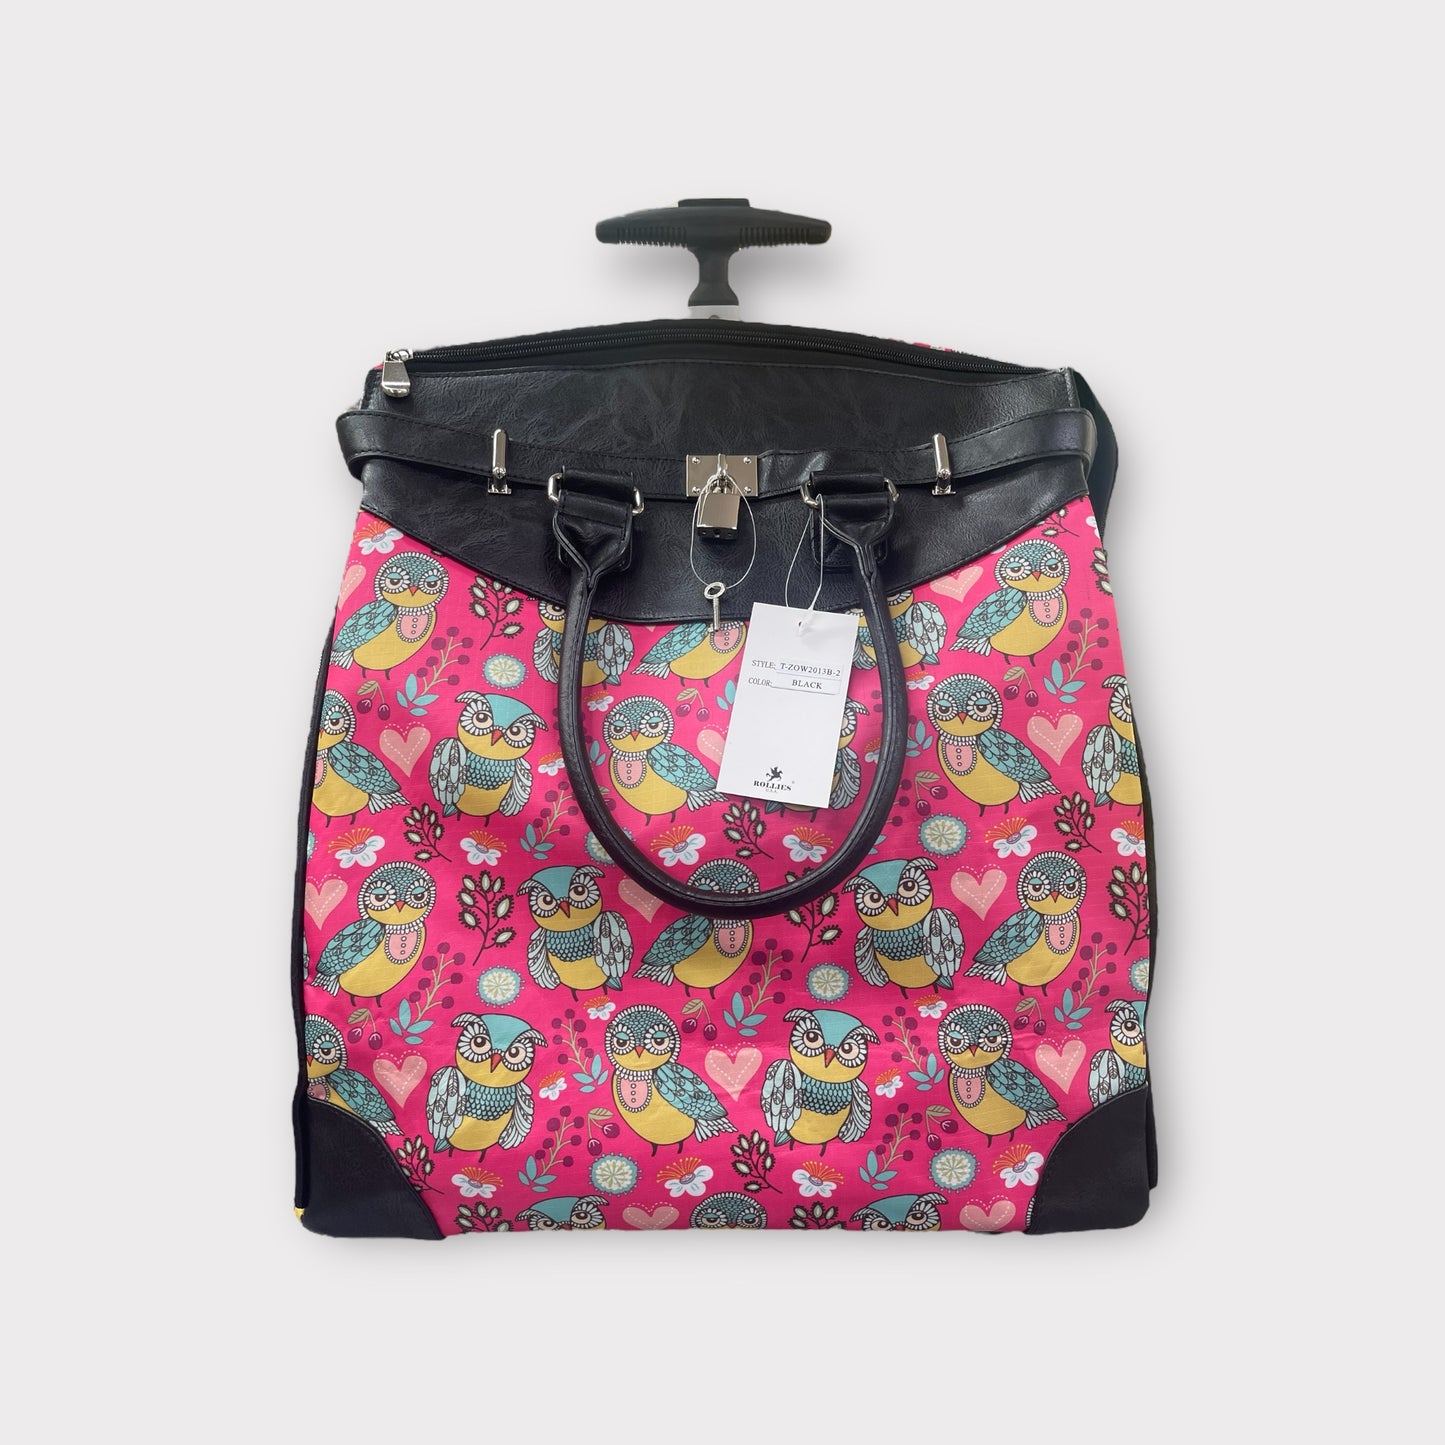 Rolling Tote Owl Pink